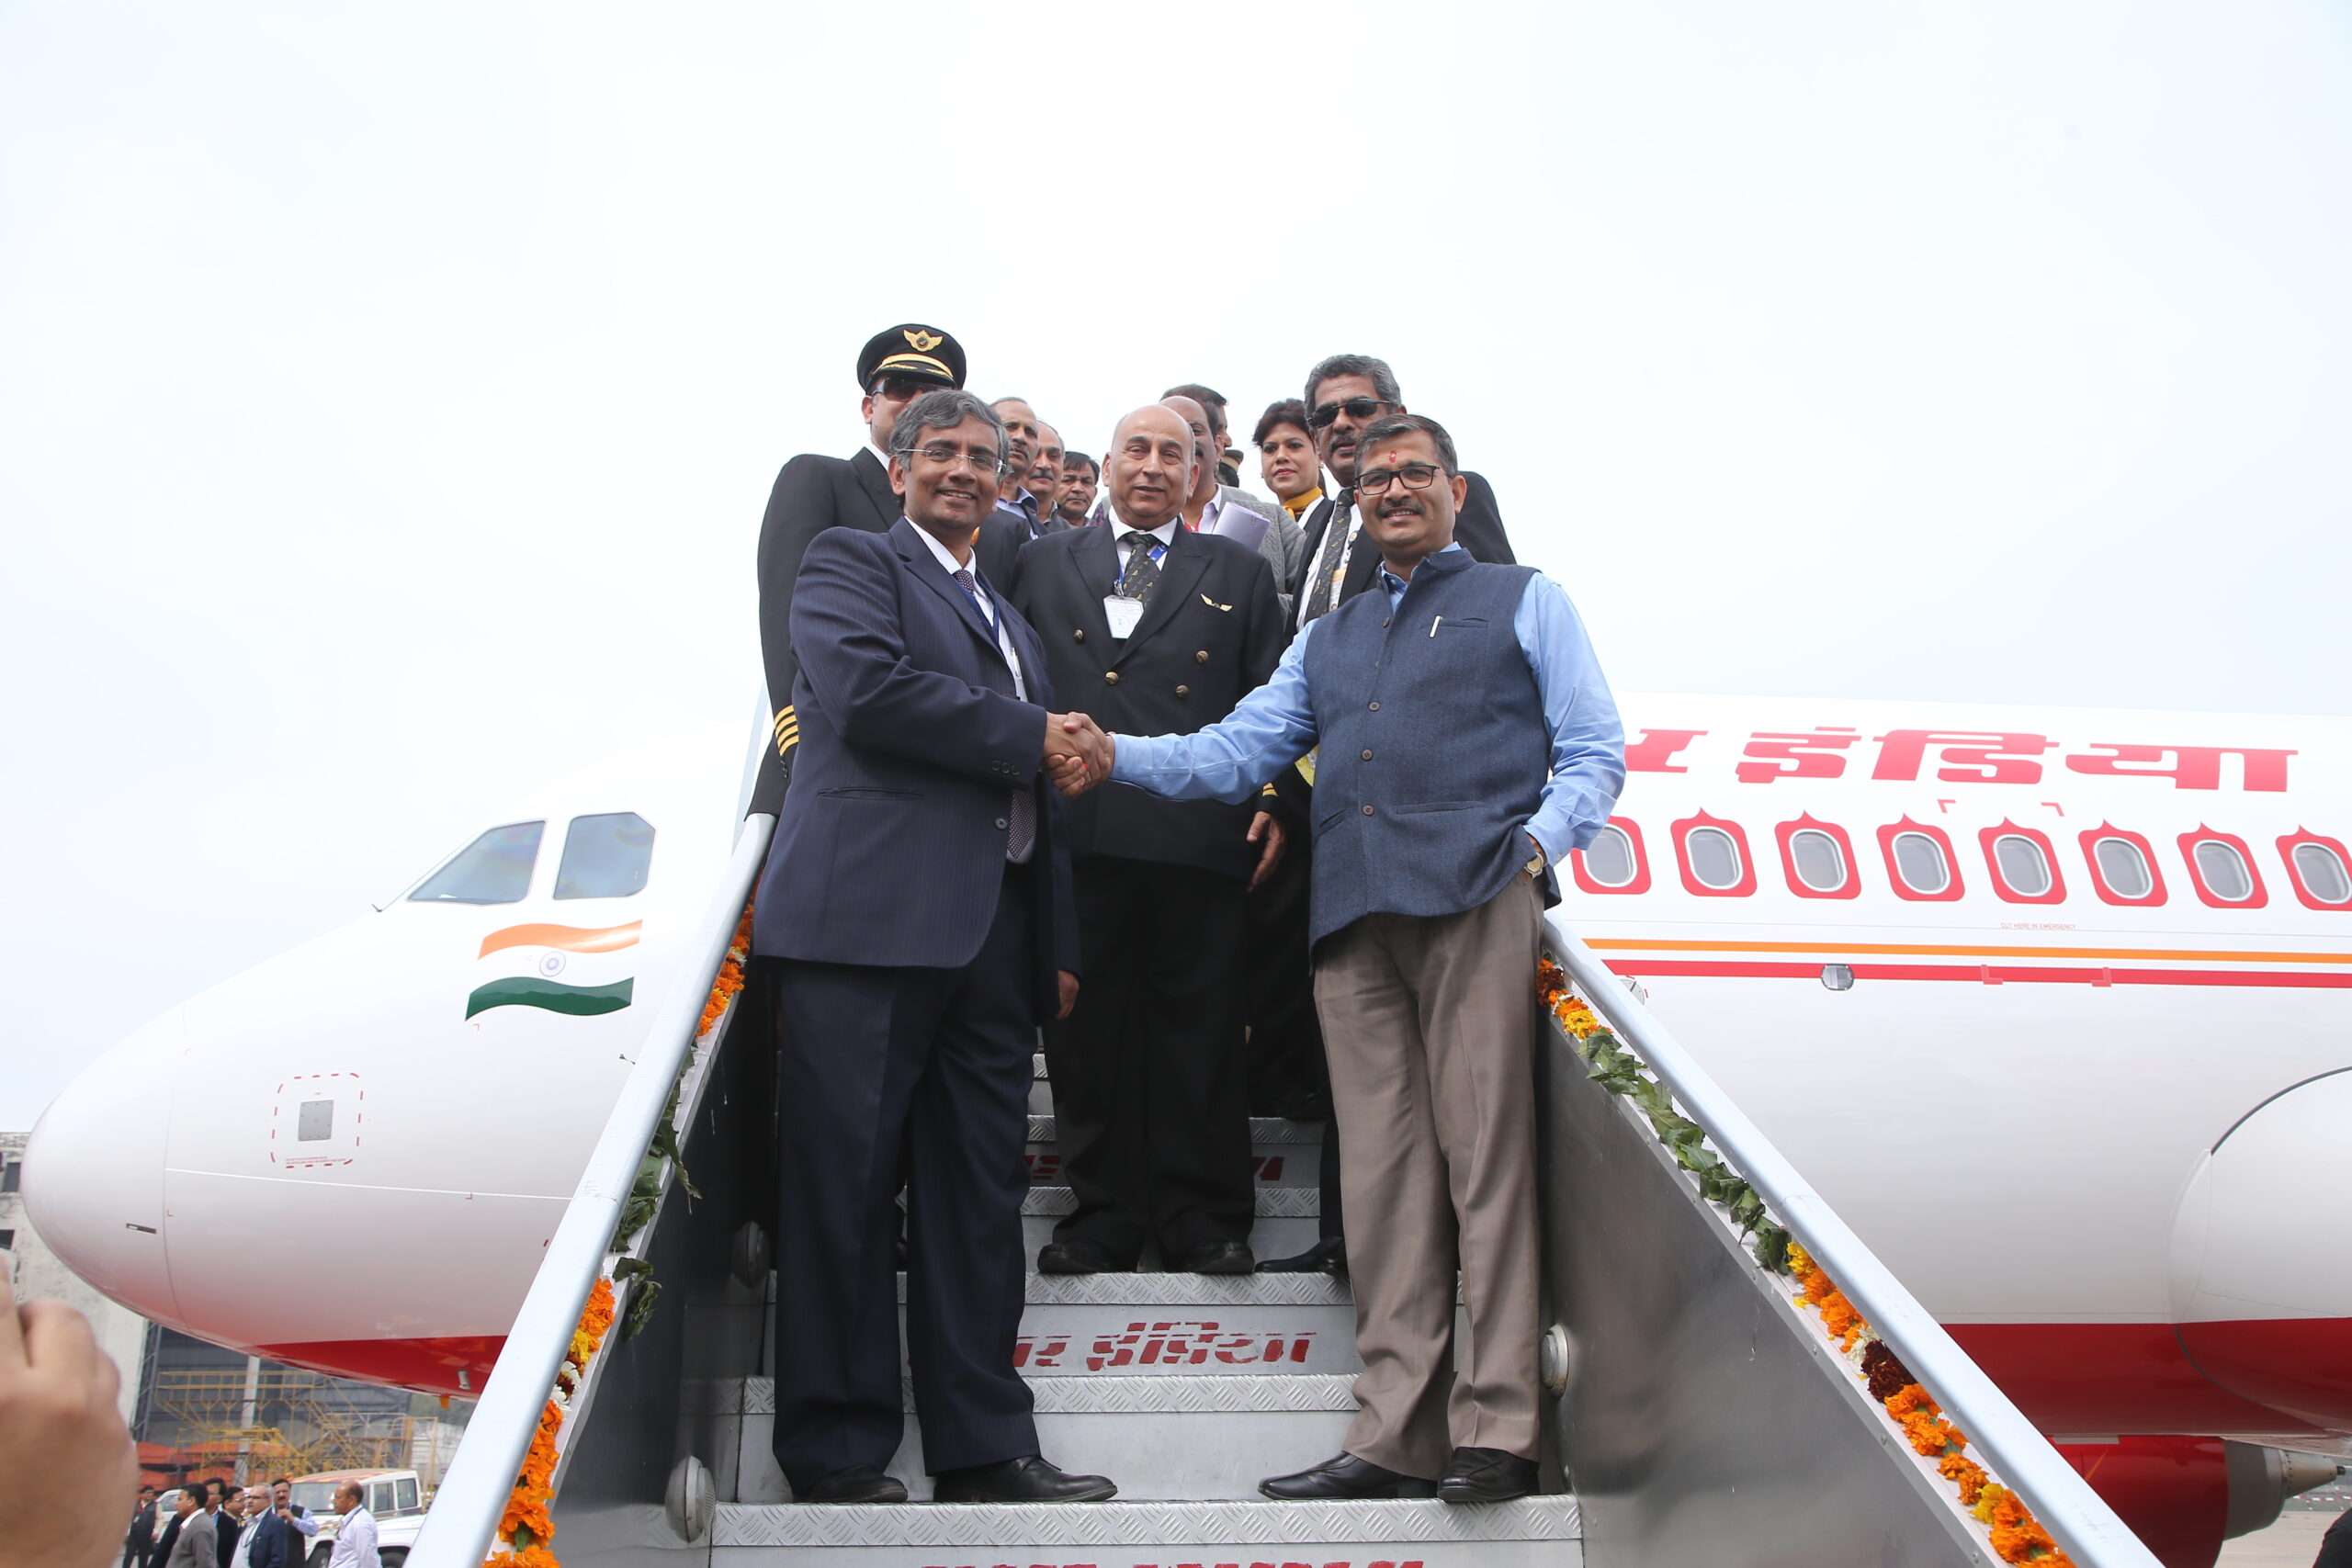 This week has seen Air India unveil it's new cabins for Economy, Premium Economy & Business Class on it's Airbus A320neo aircraft.